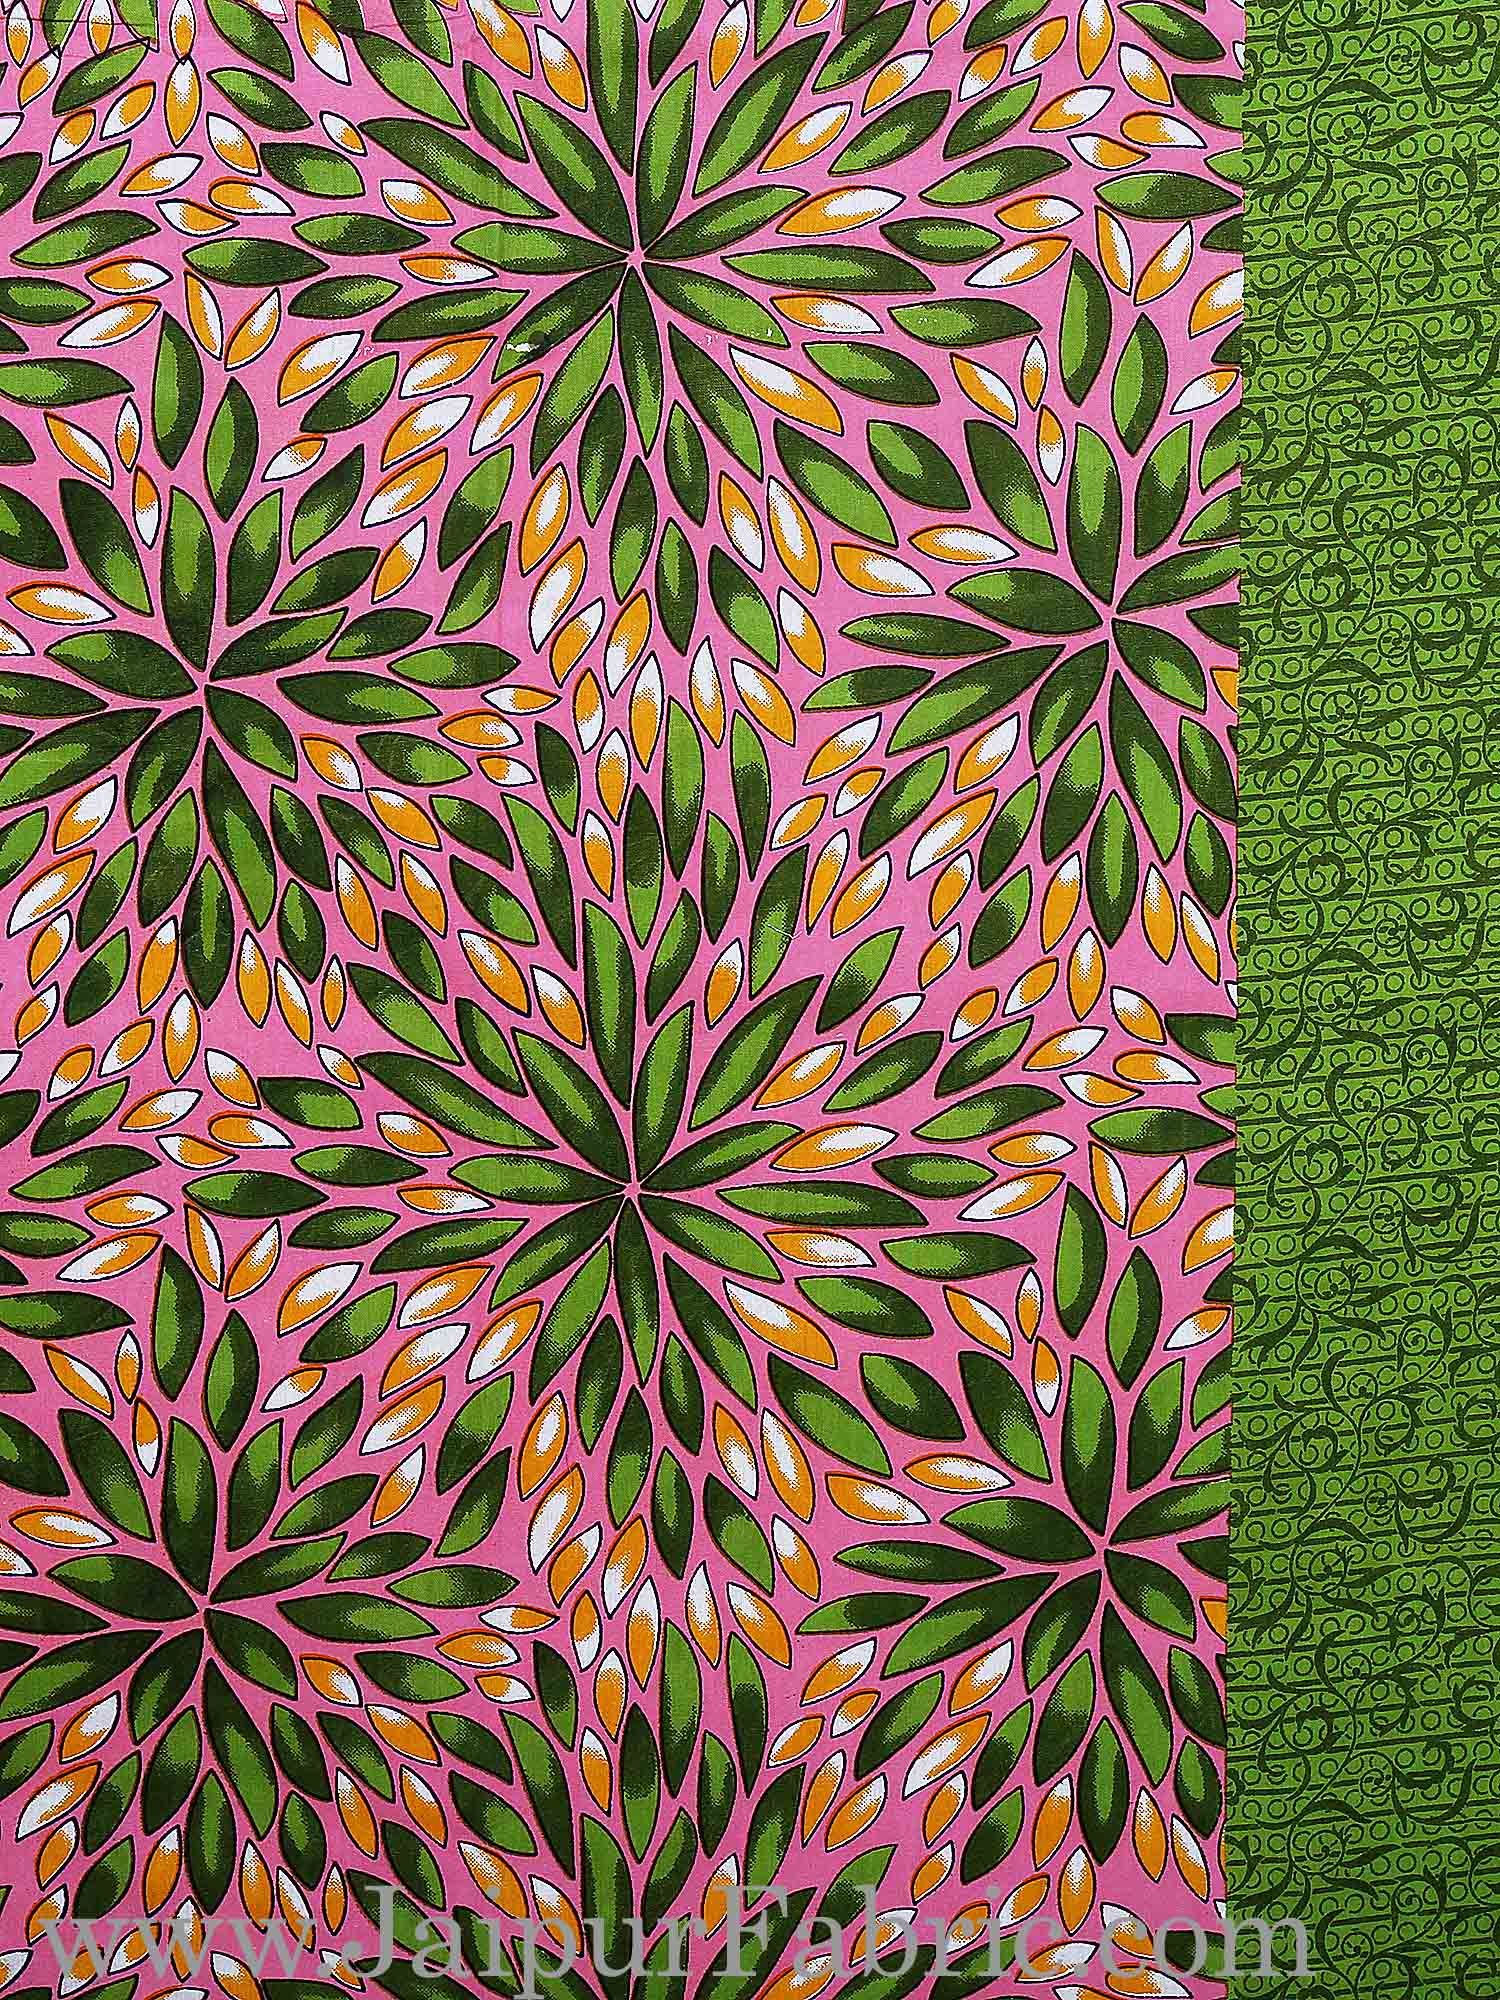 Pink Border Green Base Flower Pattern Cotton Double Bed Sheet